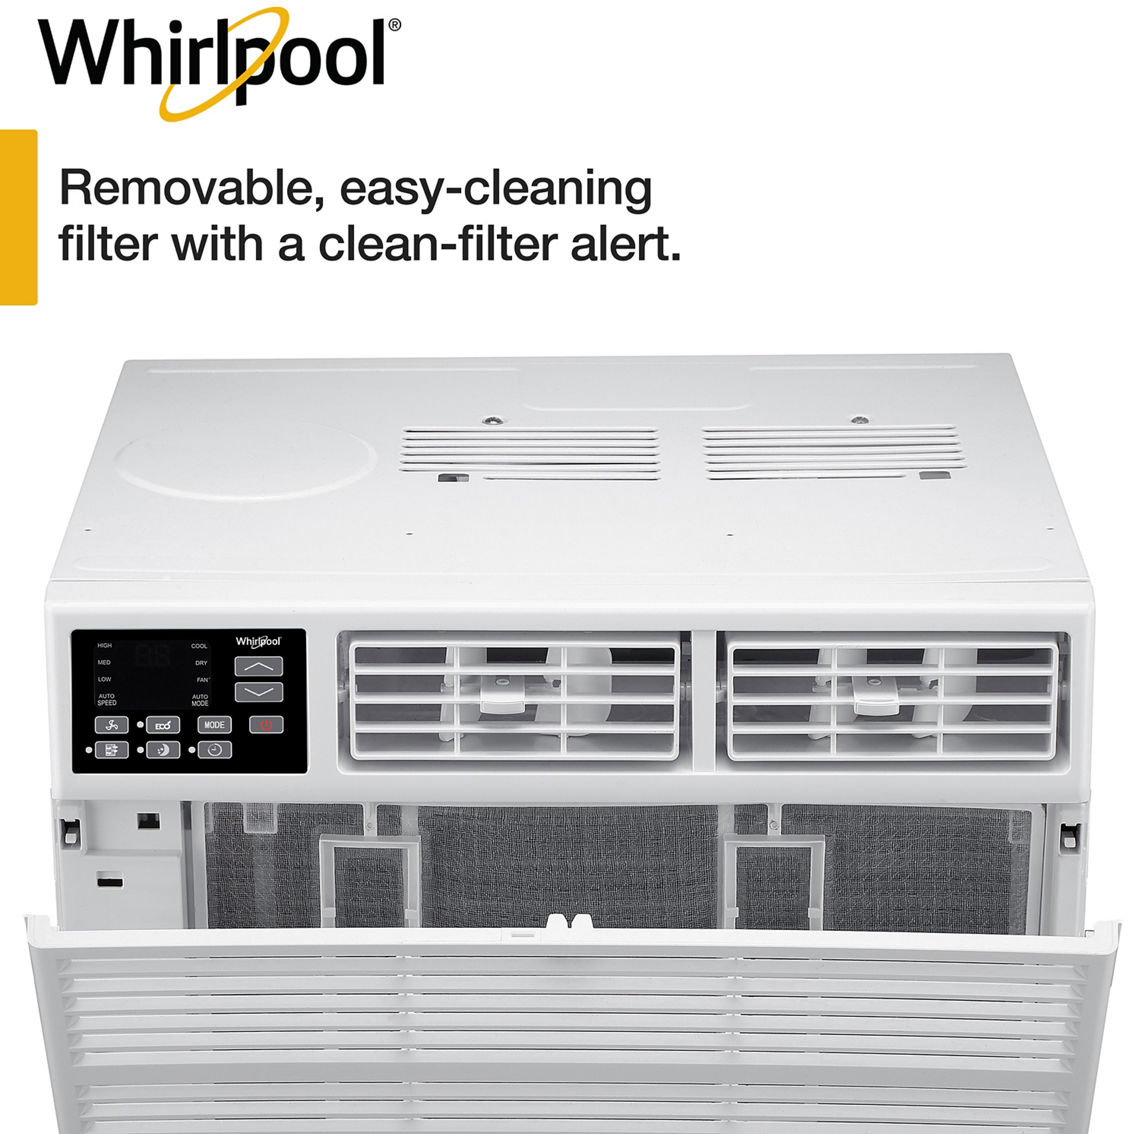 Whirlpool 15,000 BTU 115V Window-Mounted Air Conditioner with Remote Control - Image 3 of 6